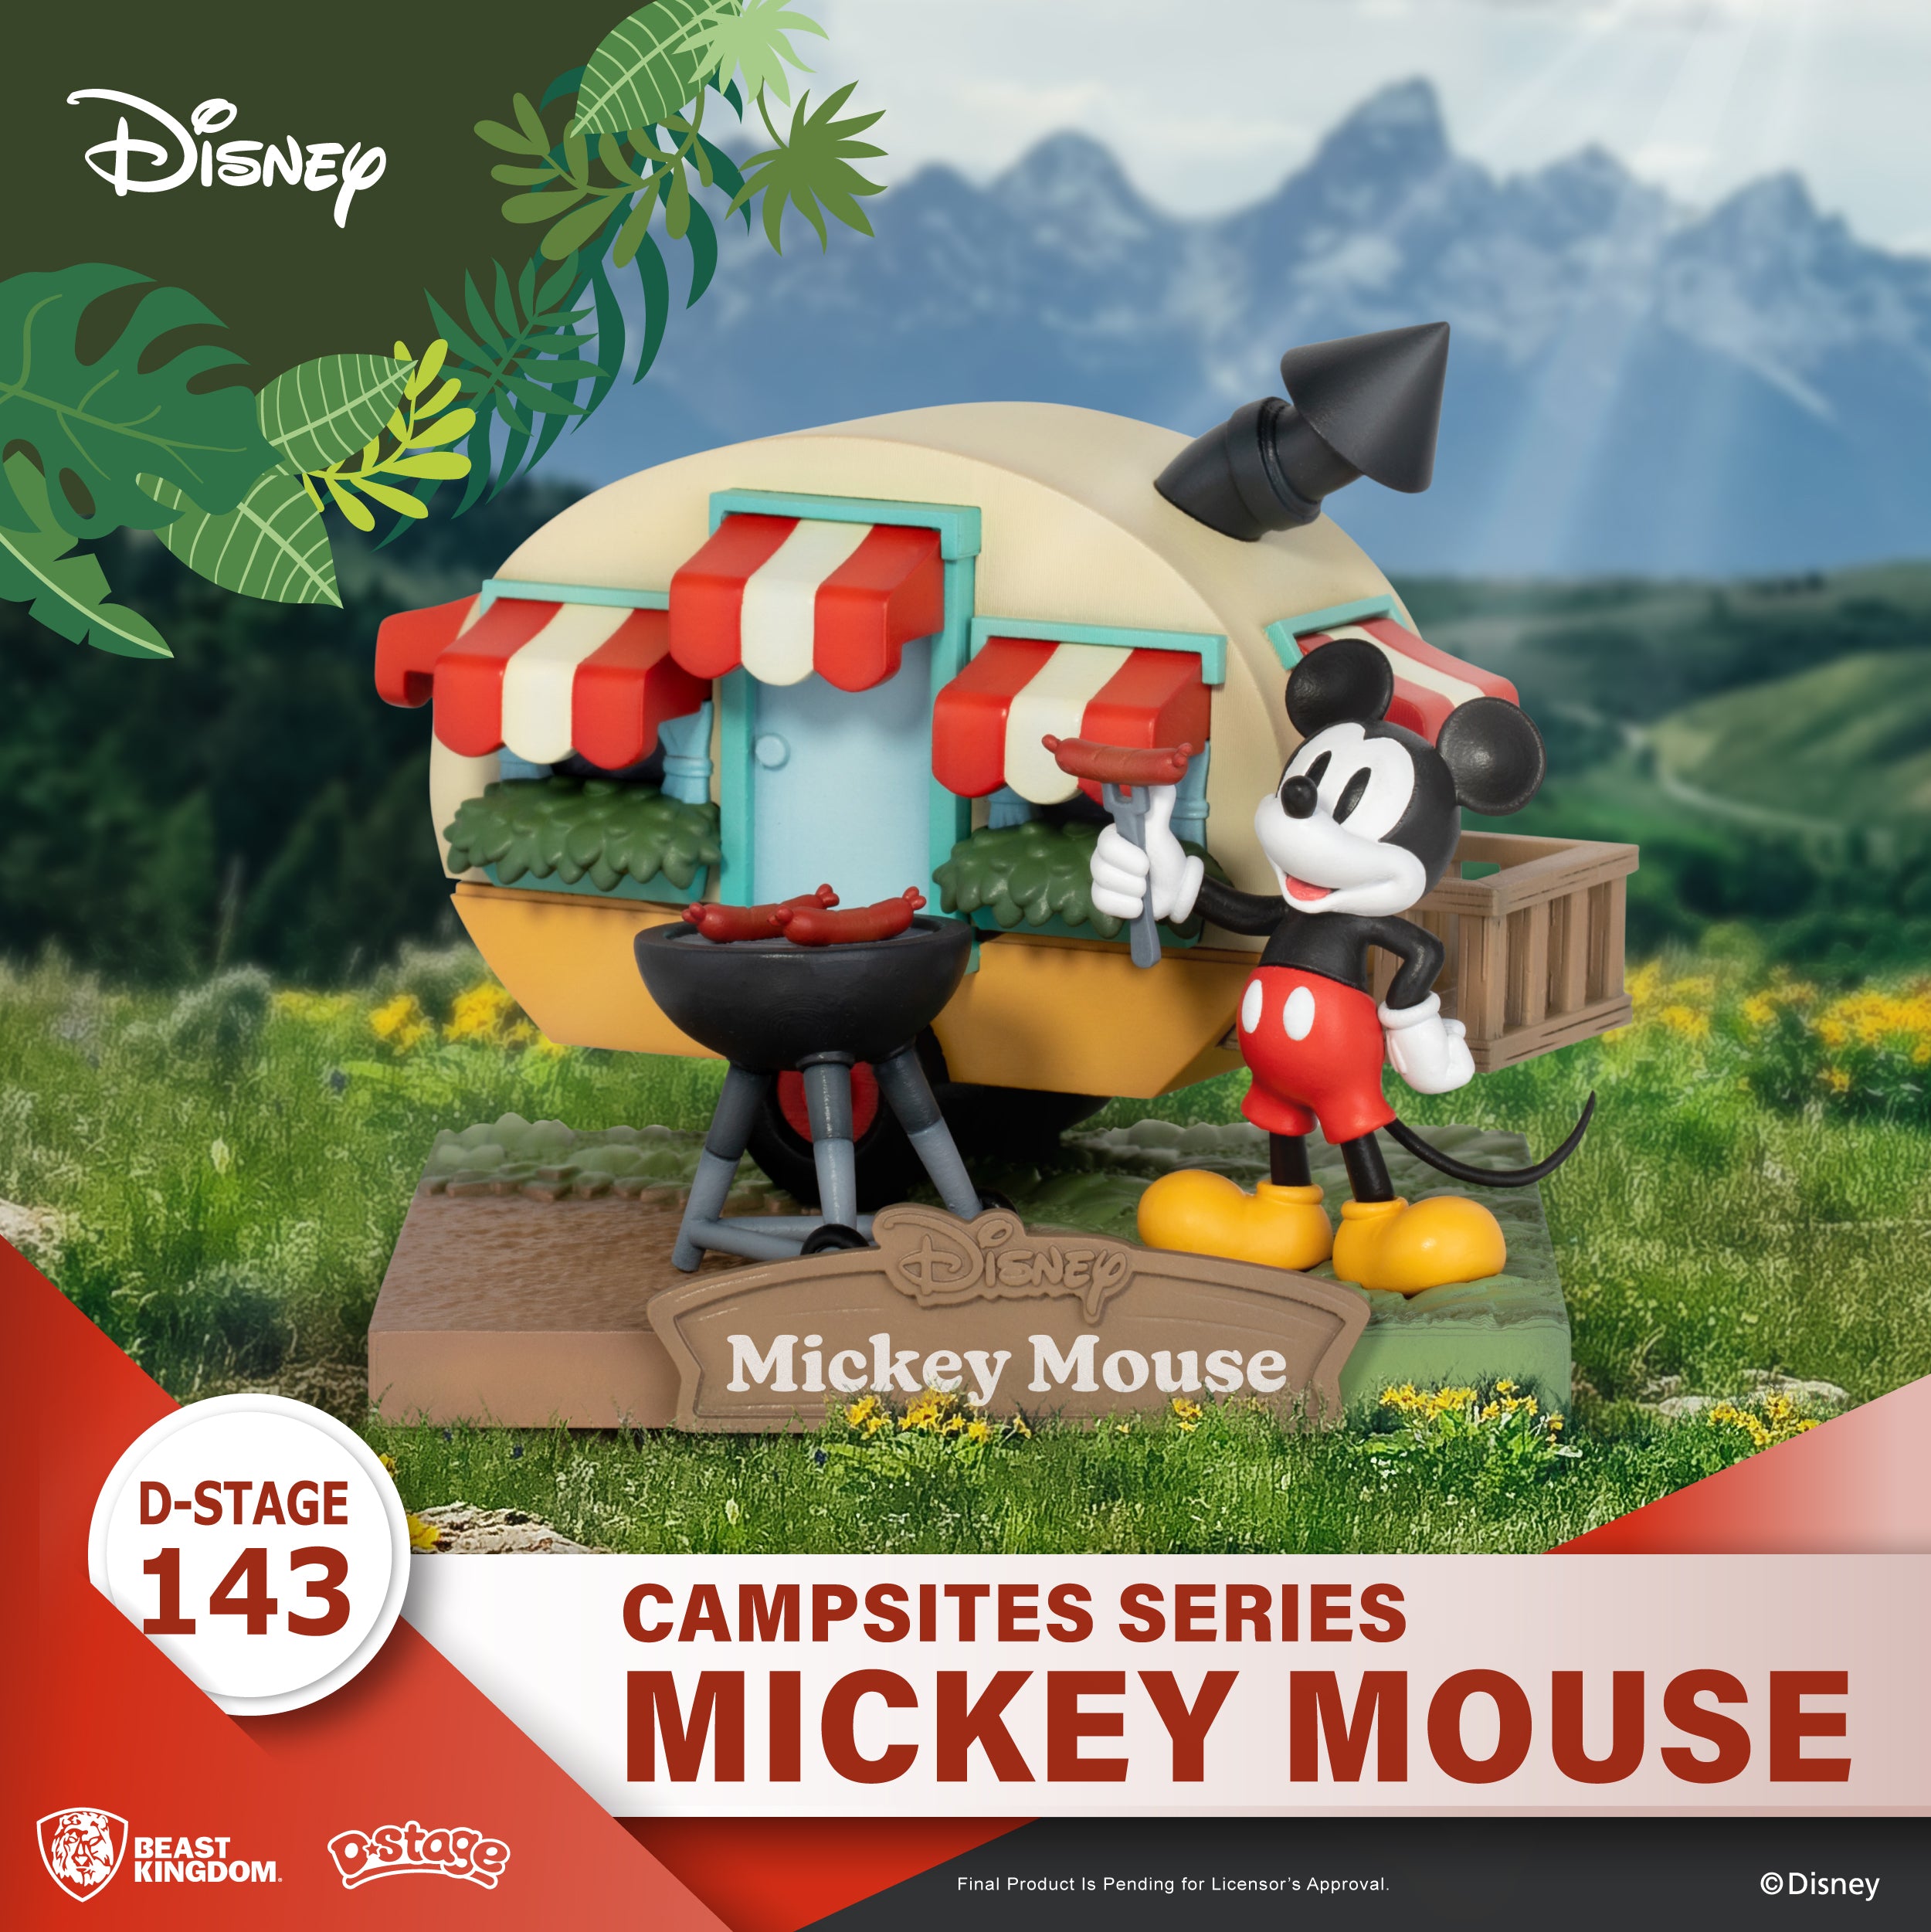 Beast Kingdom DS-143 Disney Campsites Series - Mickey Mouse Diorama Stage D-Stage Figure Statue